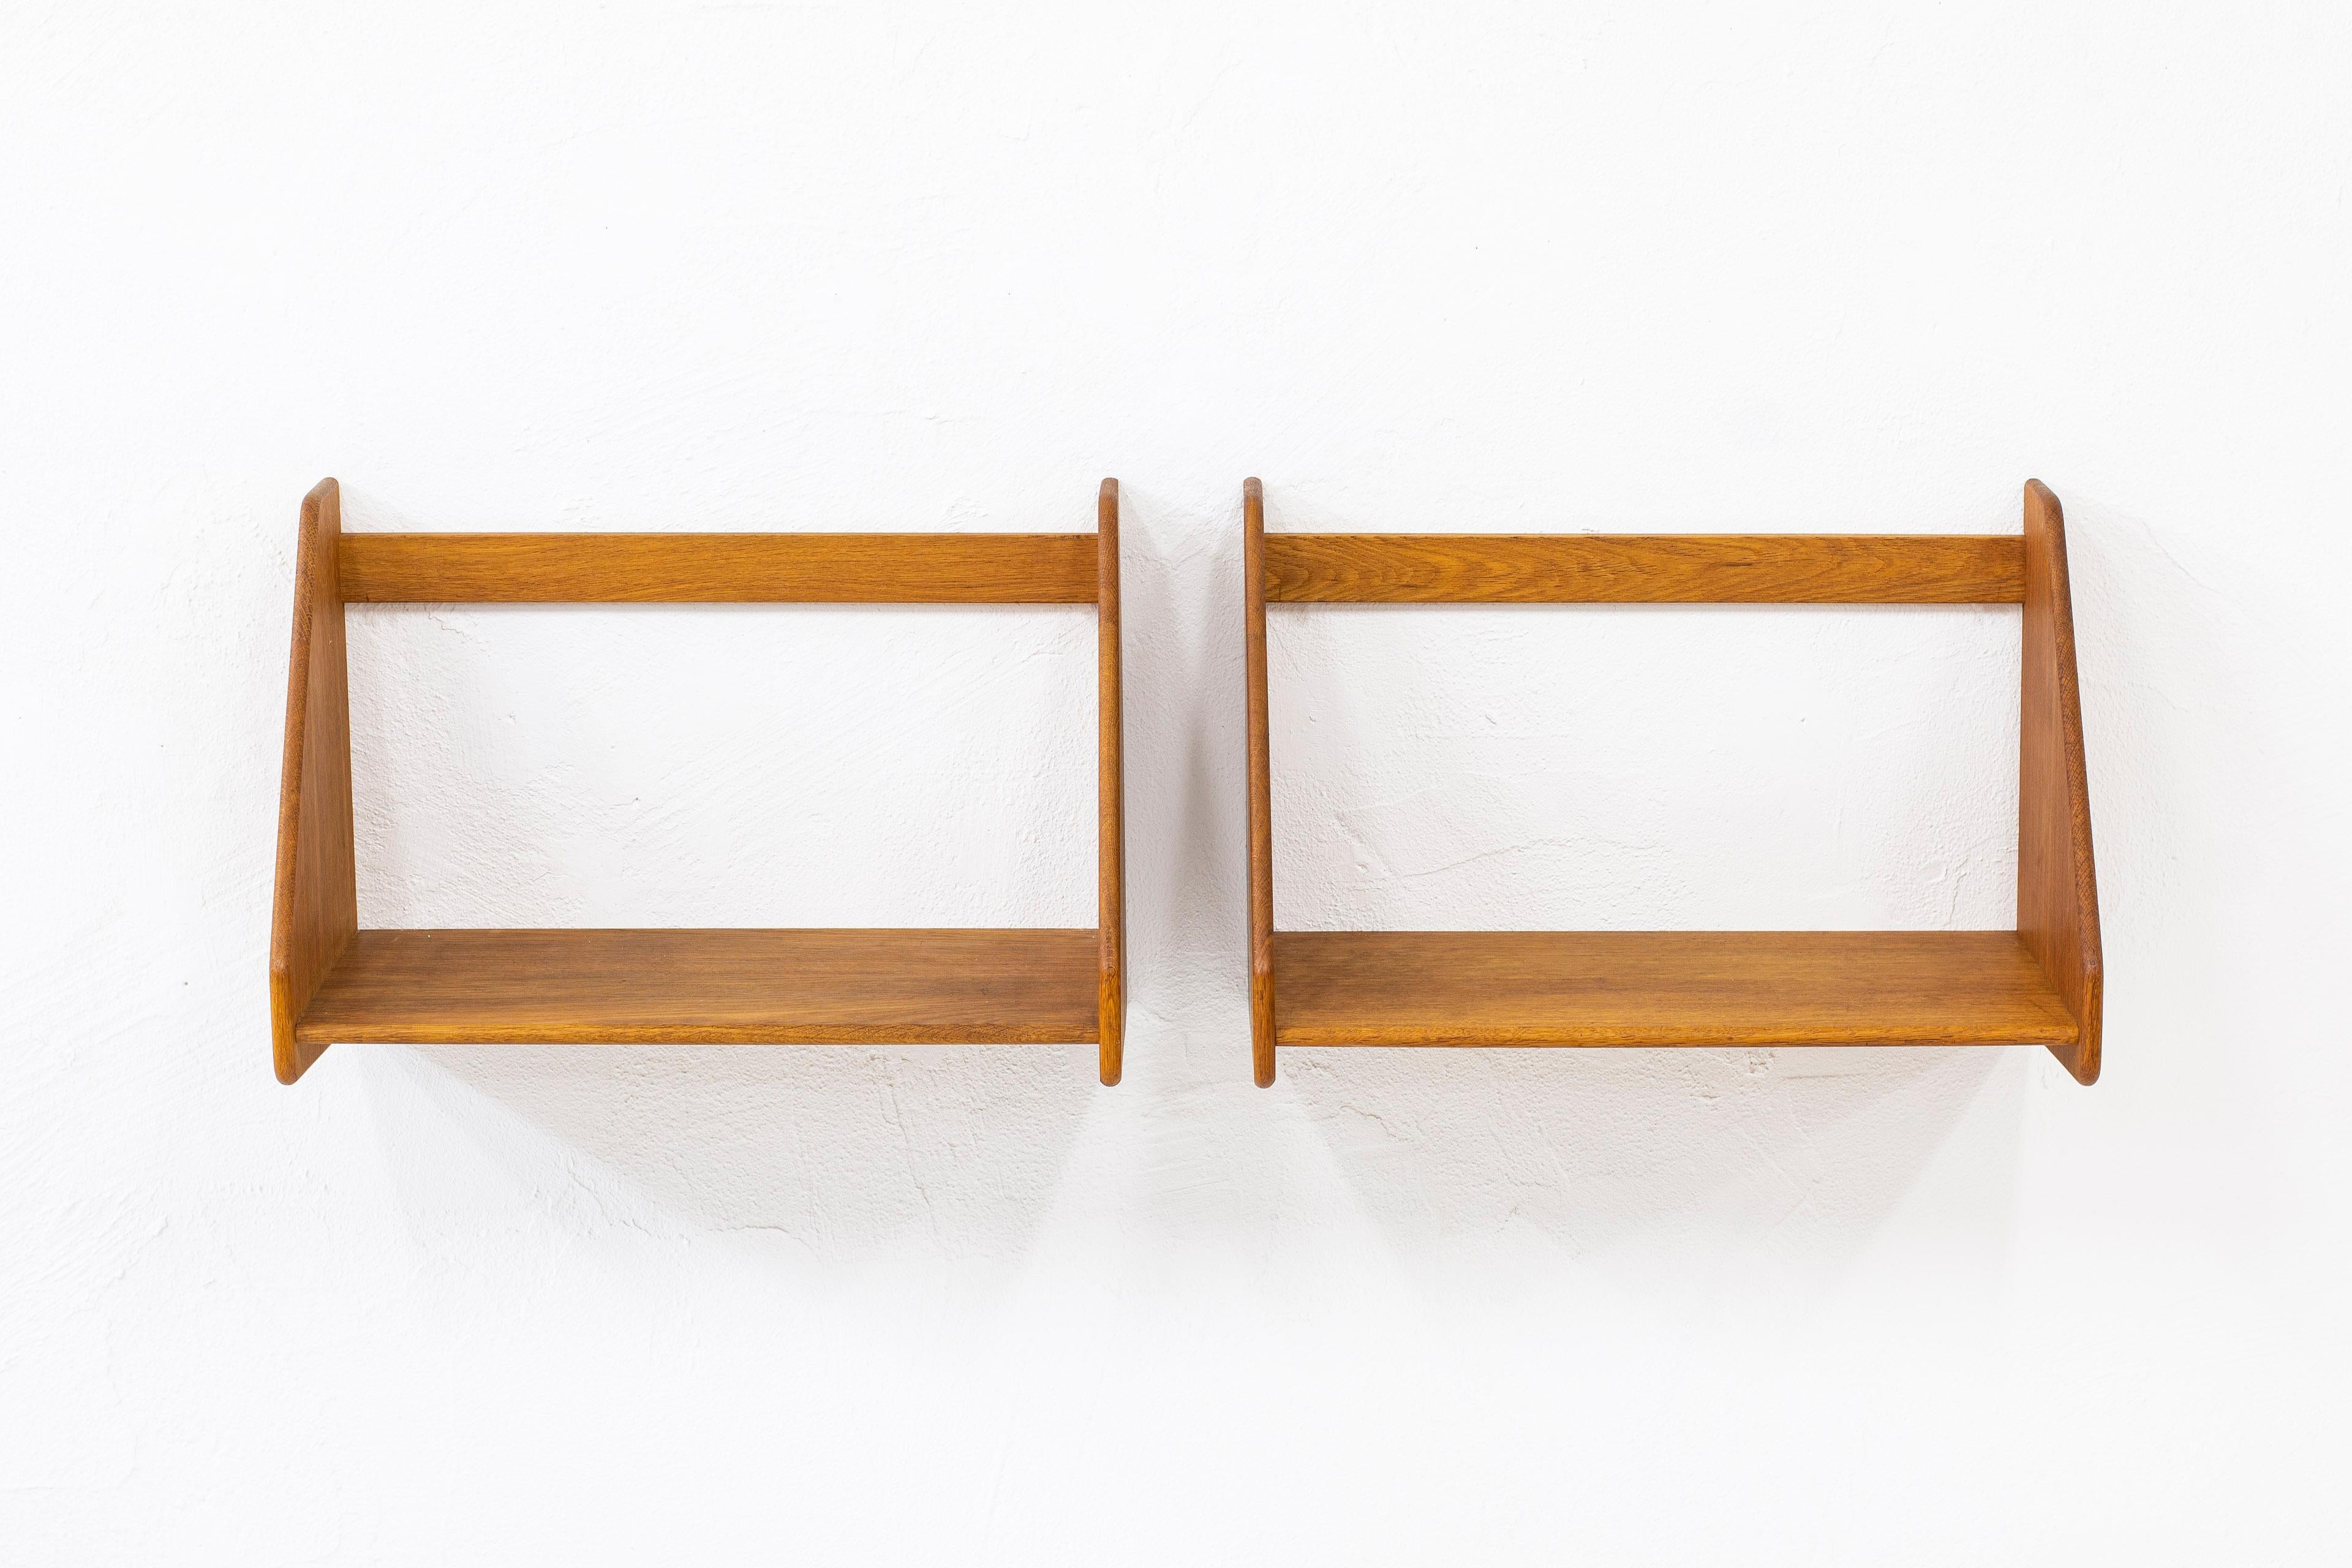 Wall shelves designed by Hans J. Wegner. Produced in Denmark by RY Møbler during the 1960s. Made from solid oak. Excellent vintage condition with very few signs of wear and use. Comes with four brass hooks for hanging on the wall. Both shelves